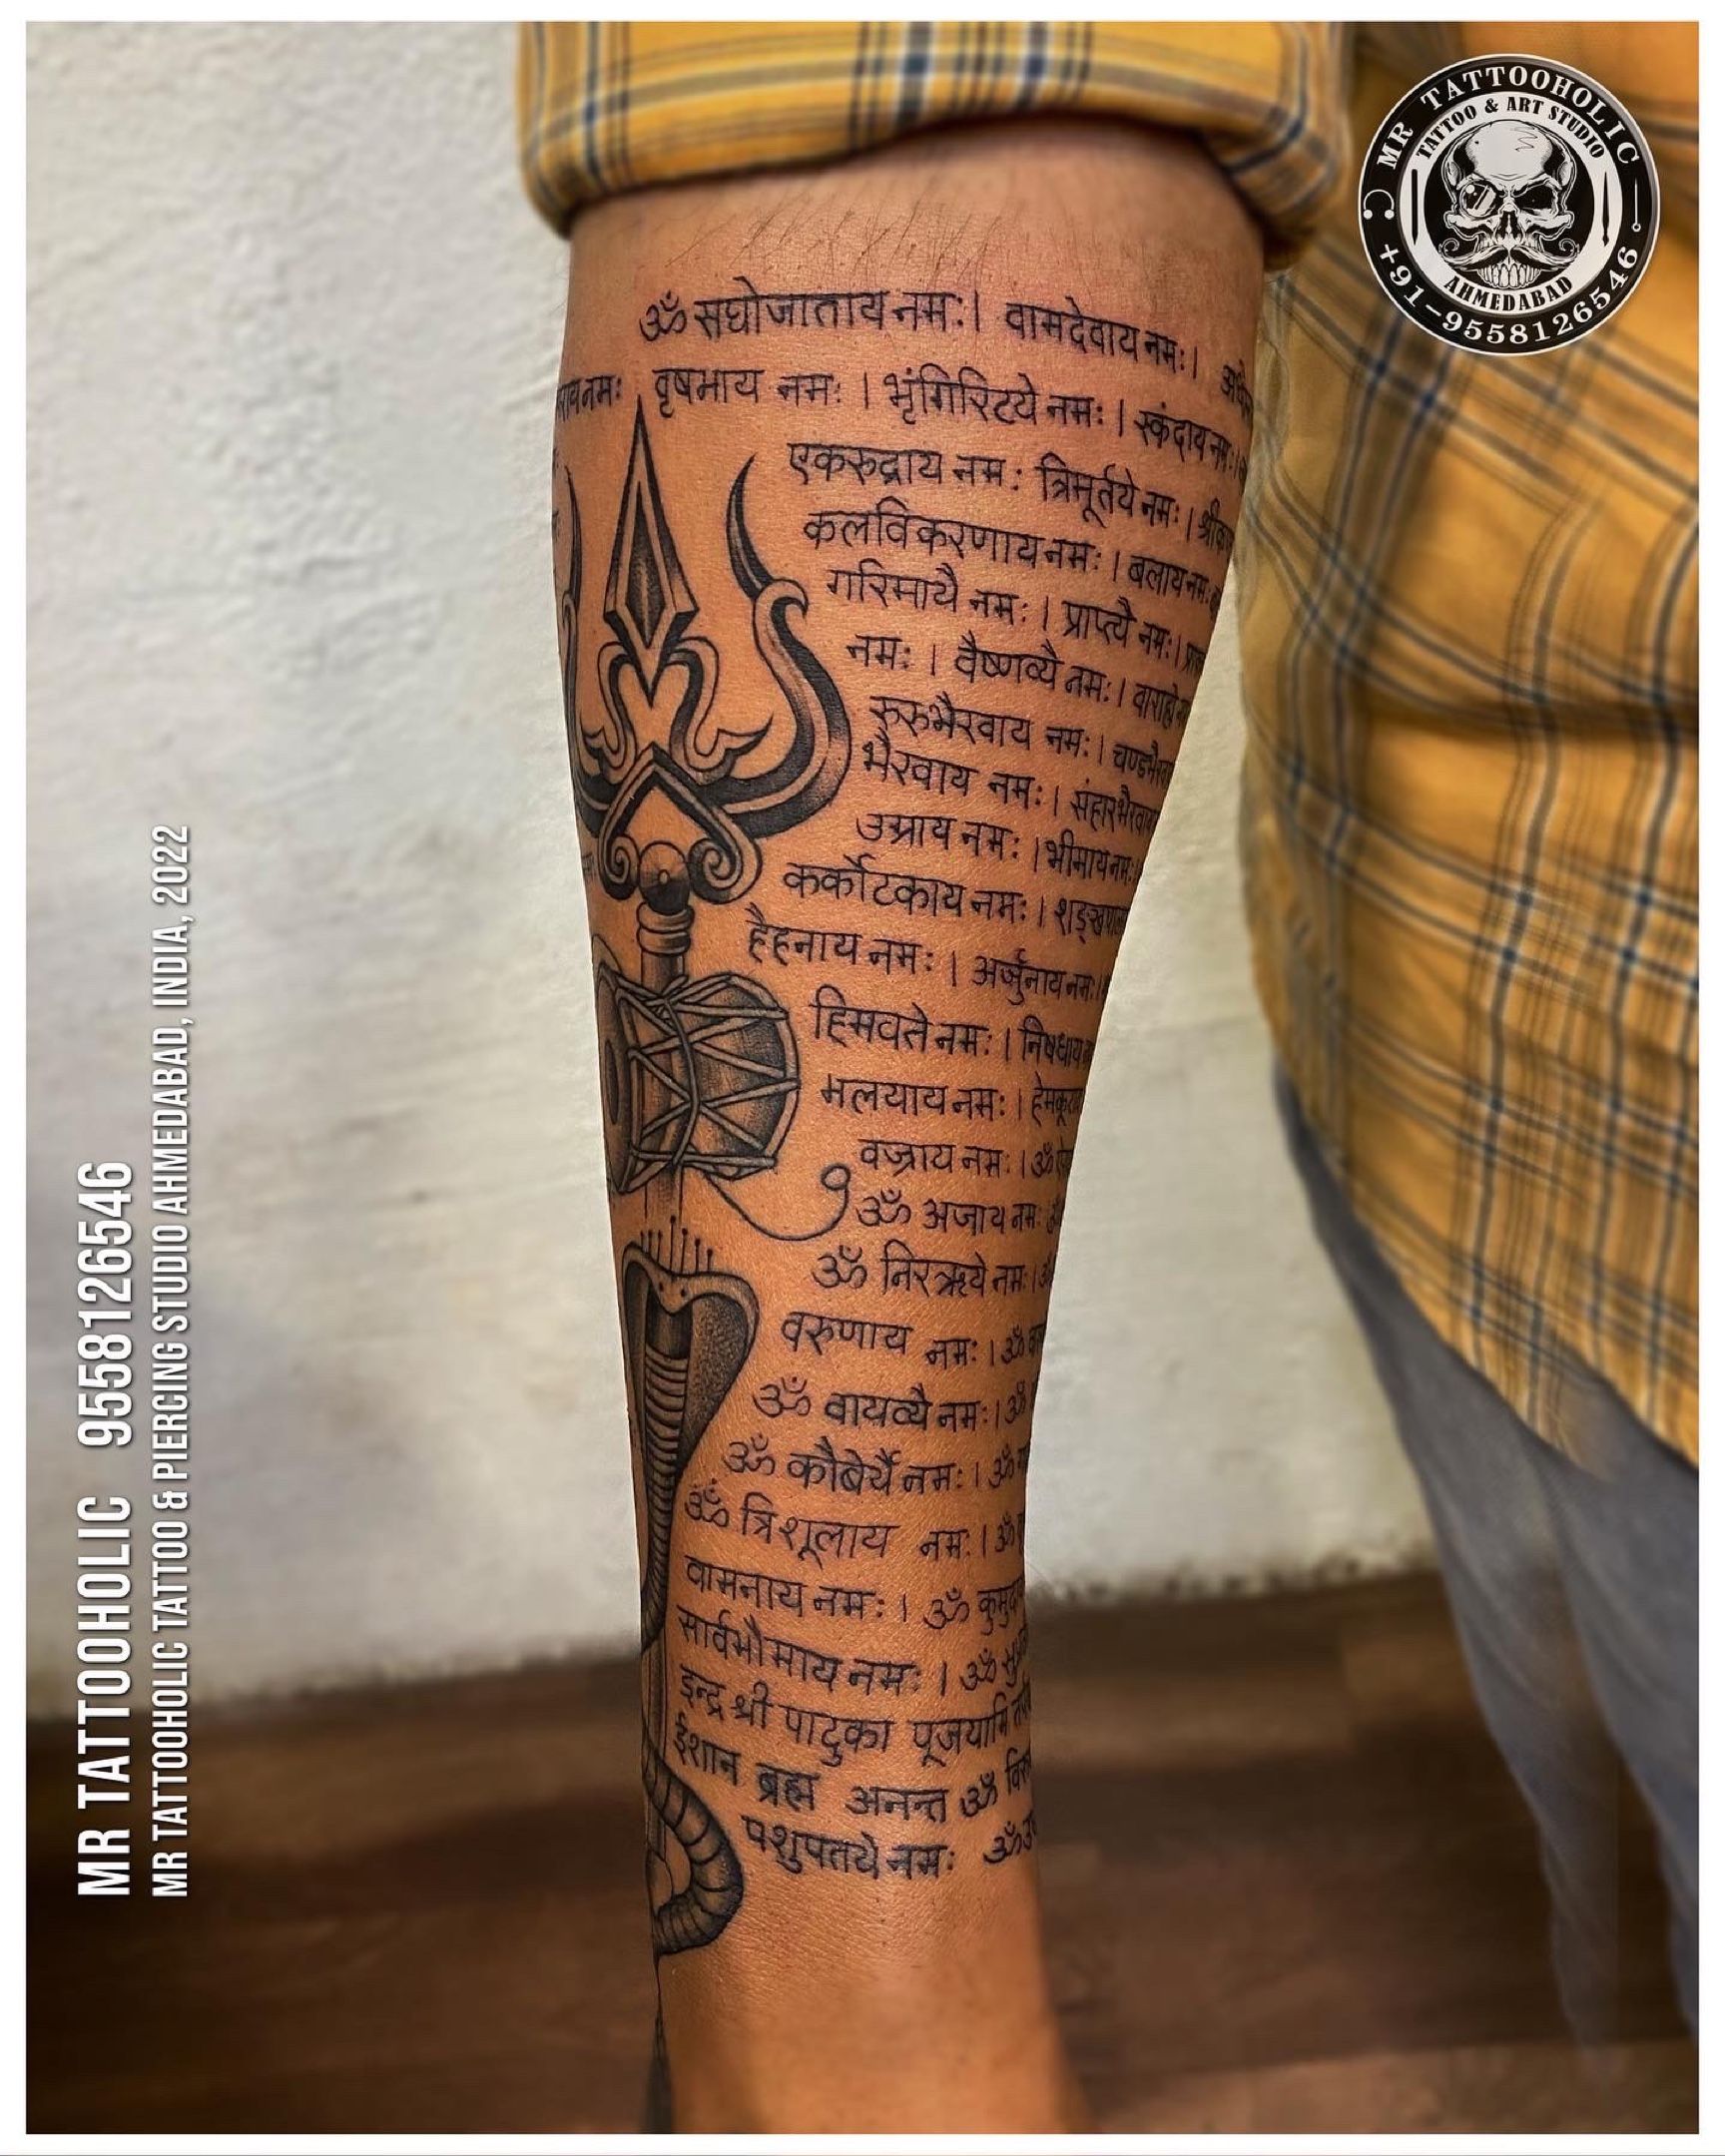 voorkoms Shiva Quote Mantra Tattoo Waterproof For God Temporary Body Tattoo  - Price in India, Buy voorkoms Shiva Quote Mantra Tattoo Waterproof For God  Temporary Body Tattoo Online In India, Reviews, Ratings